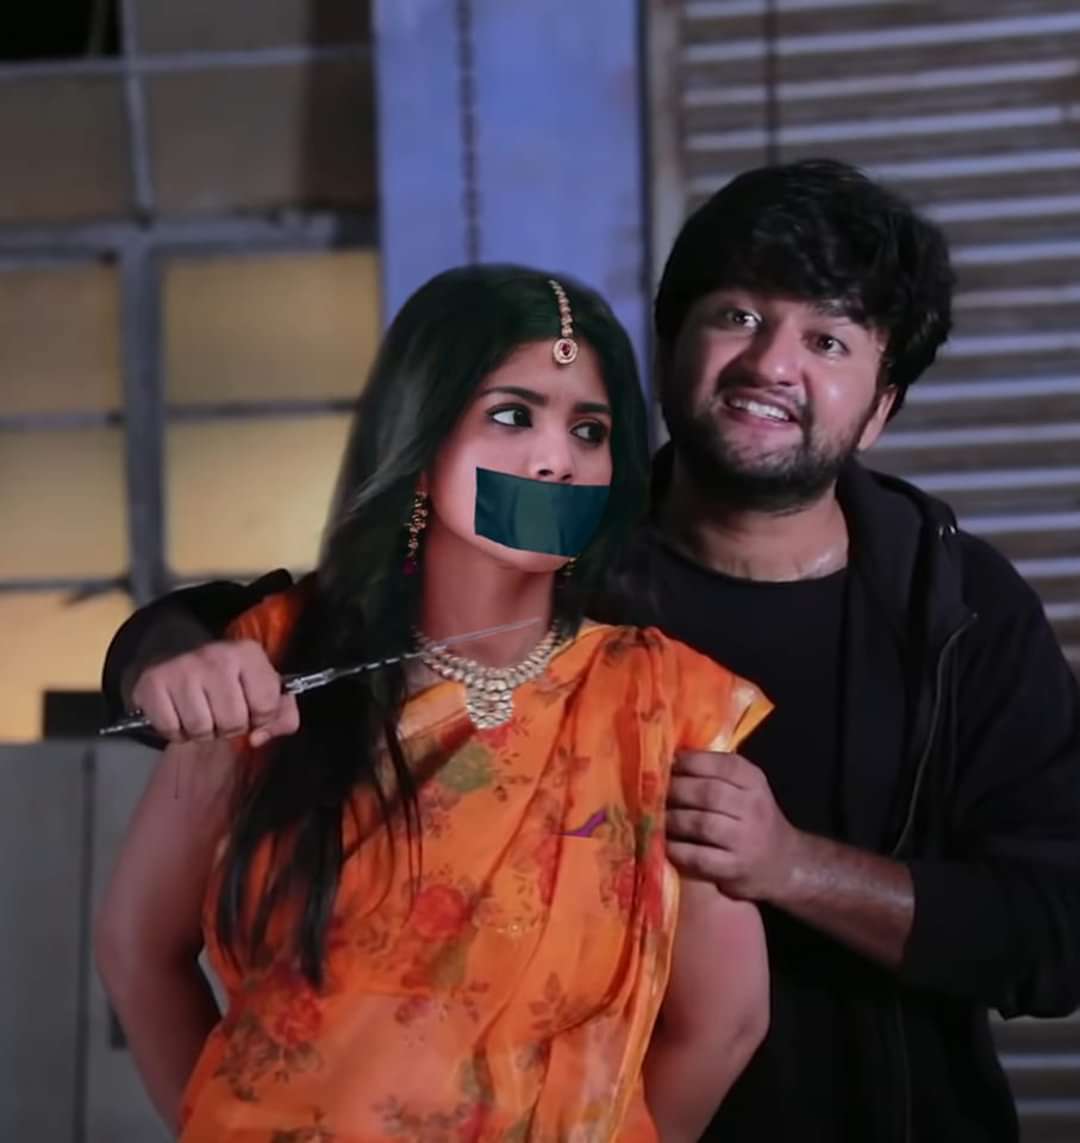 Indian Actress Bound And Gagged Desi Bondage 05 By Firearms143 On